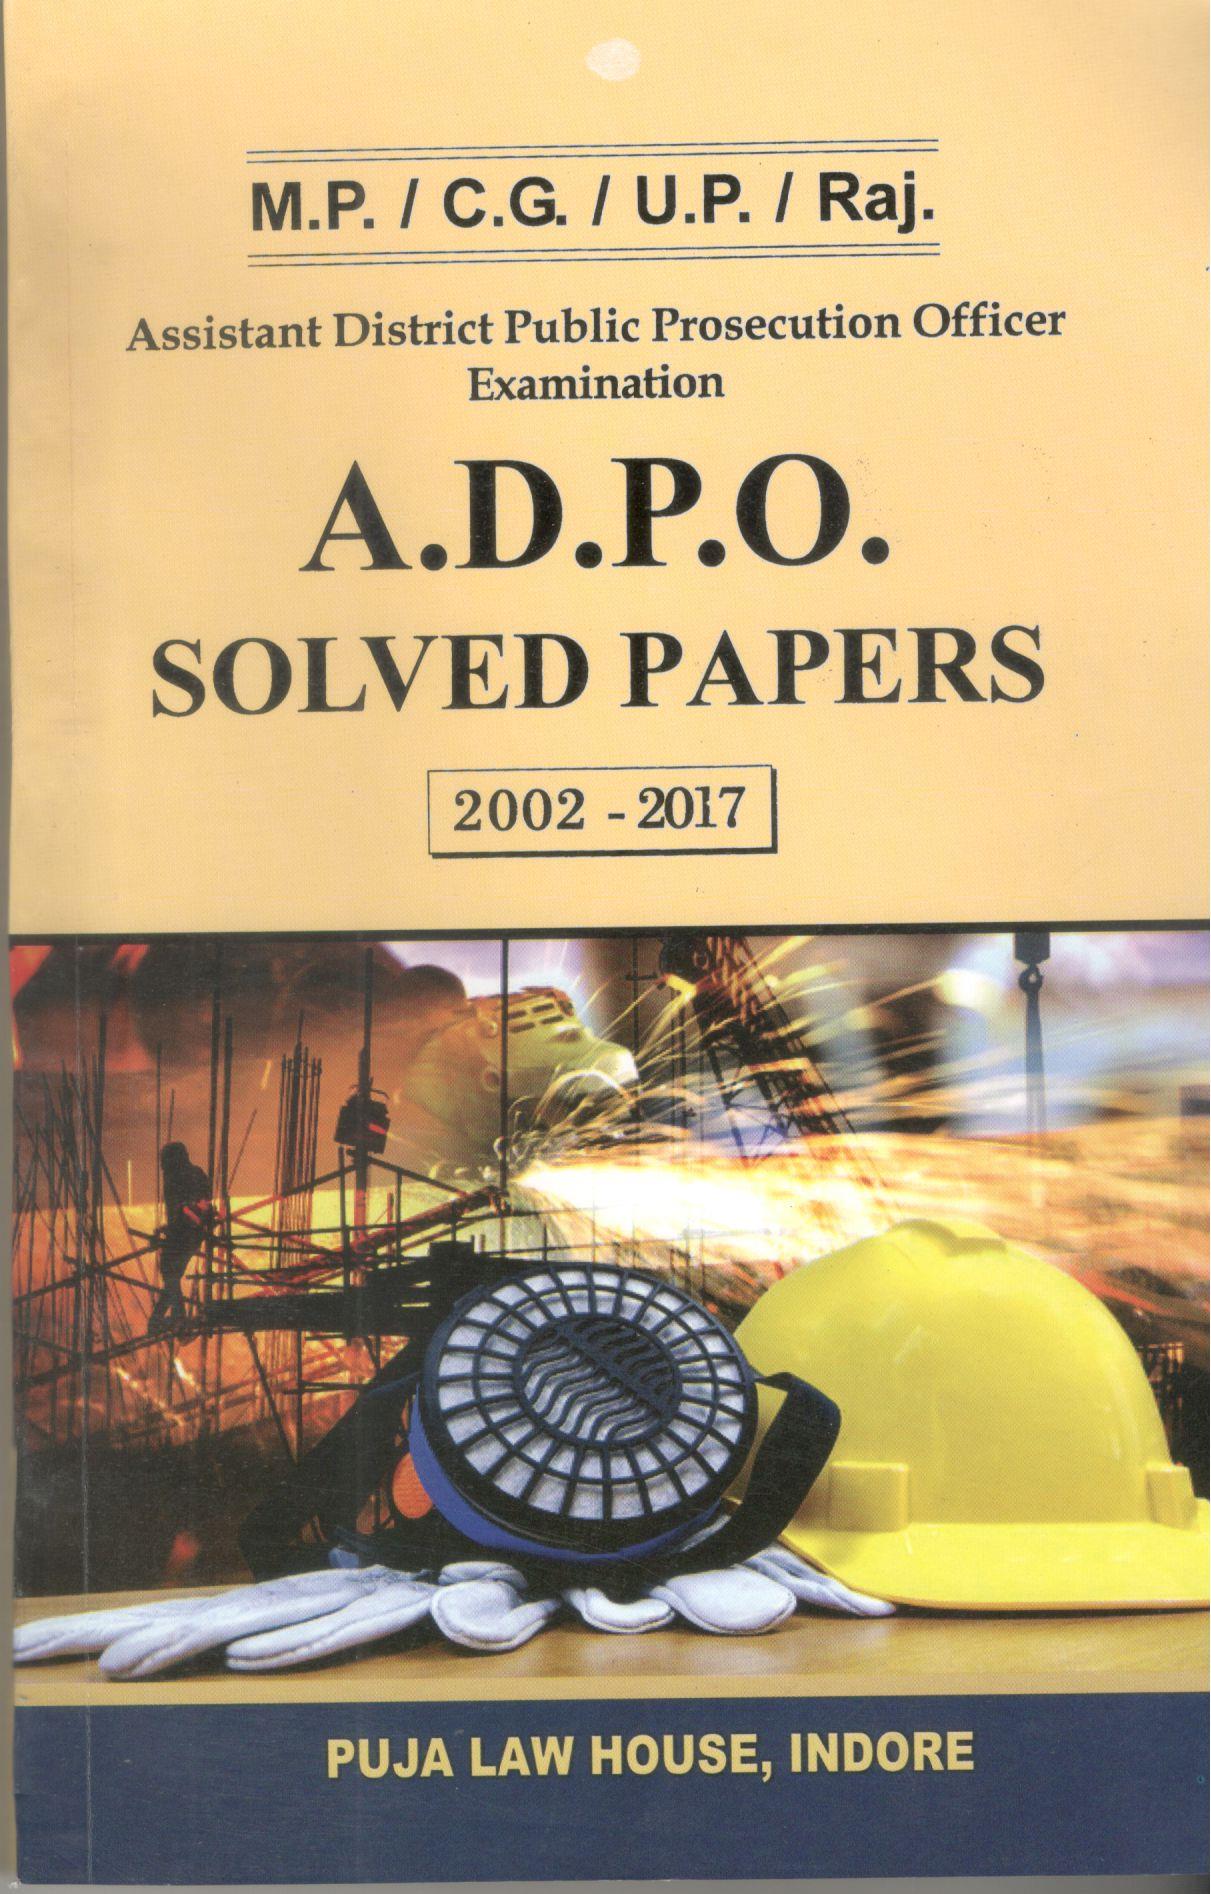  Buy M.P. /C.G. / U.P. / Raj. Assistant District Public Prosecution Officer Examination  A.D.P.O. SOLVED PAPERS [2002 - 2017]